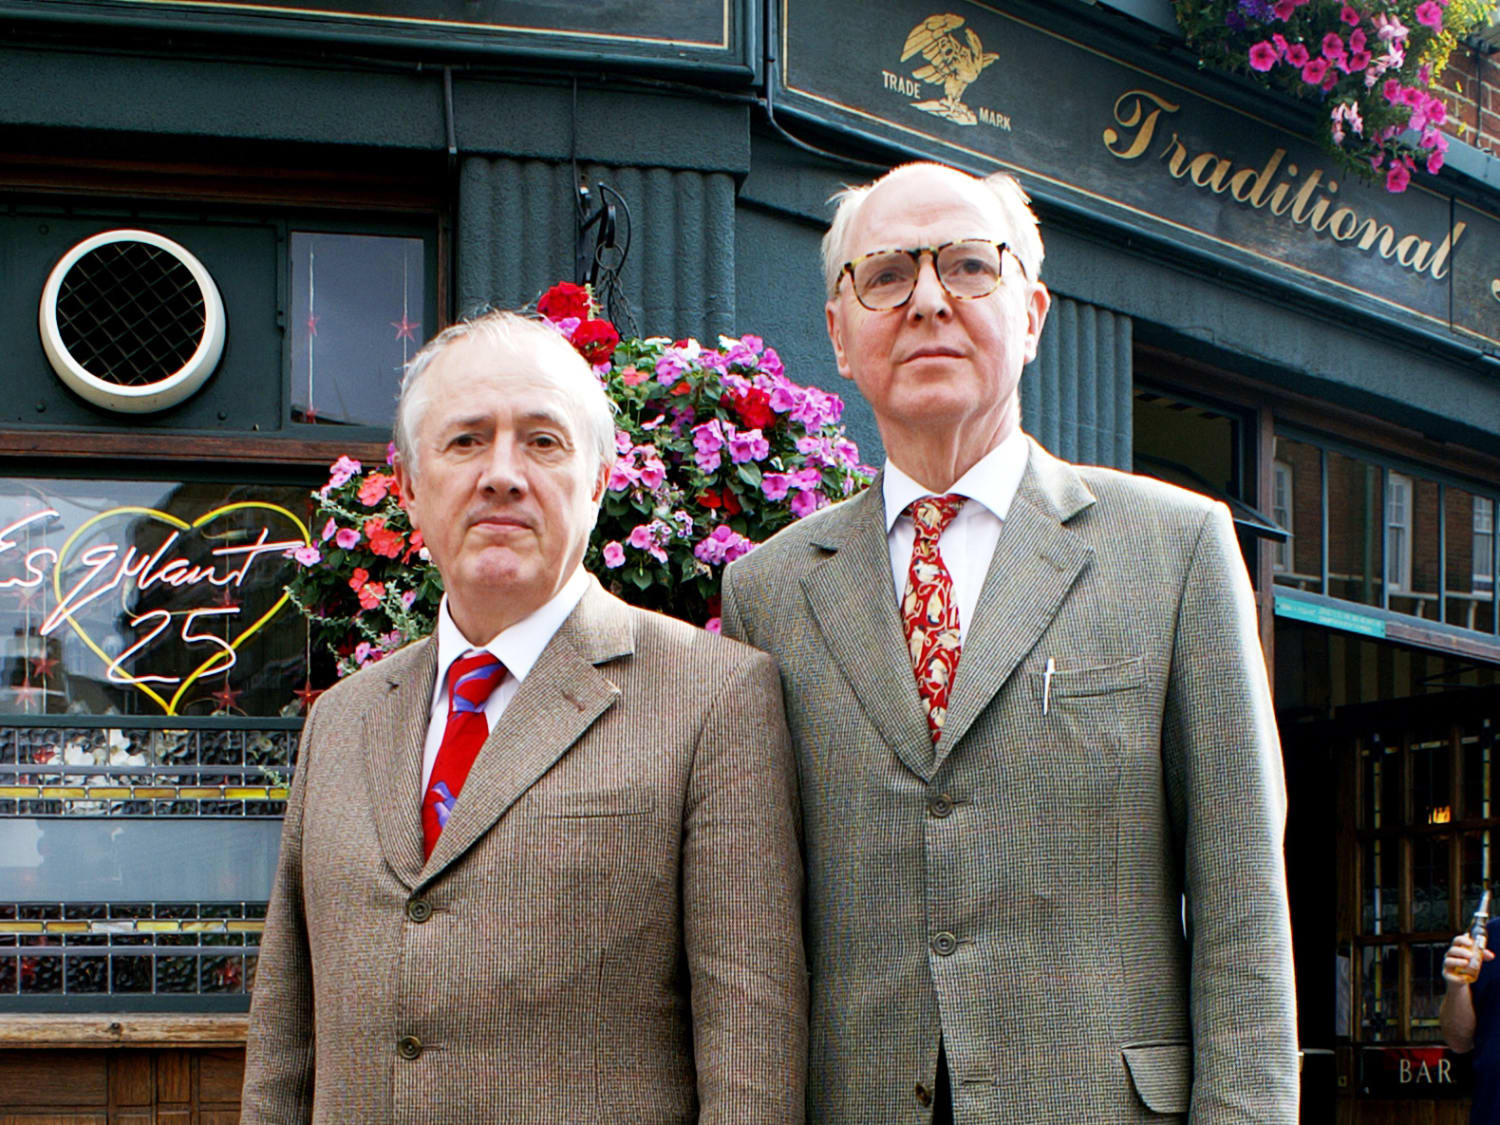 Gilbert & George quit Royal Academy over exhibition snub